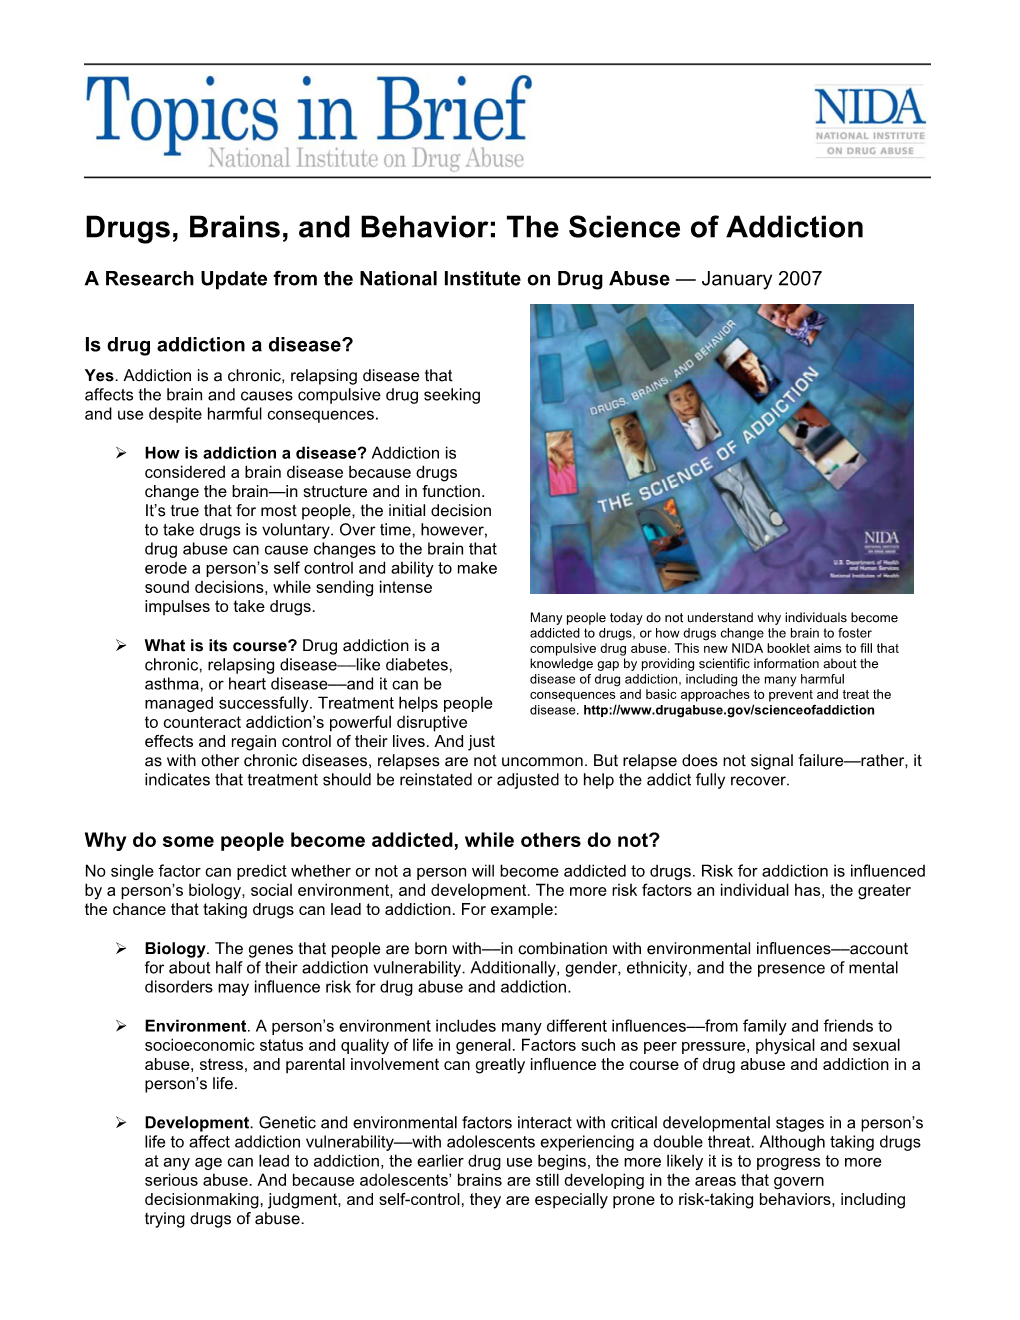 Drugs, Brains, and Behavior: the Science of Addiction